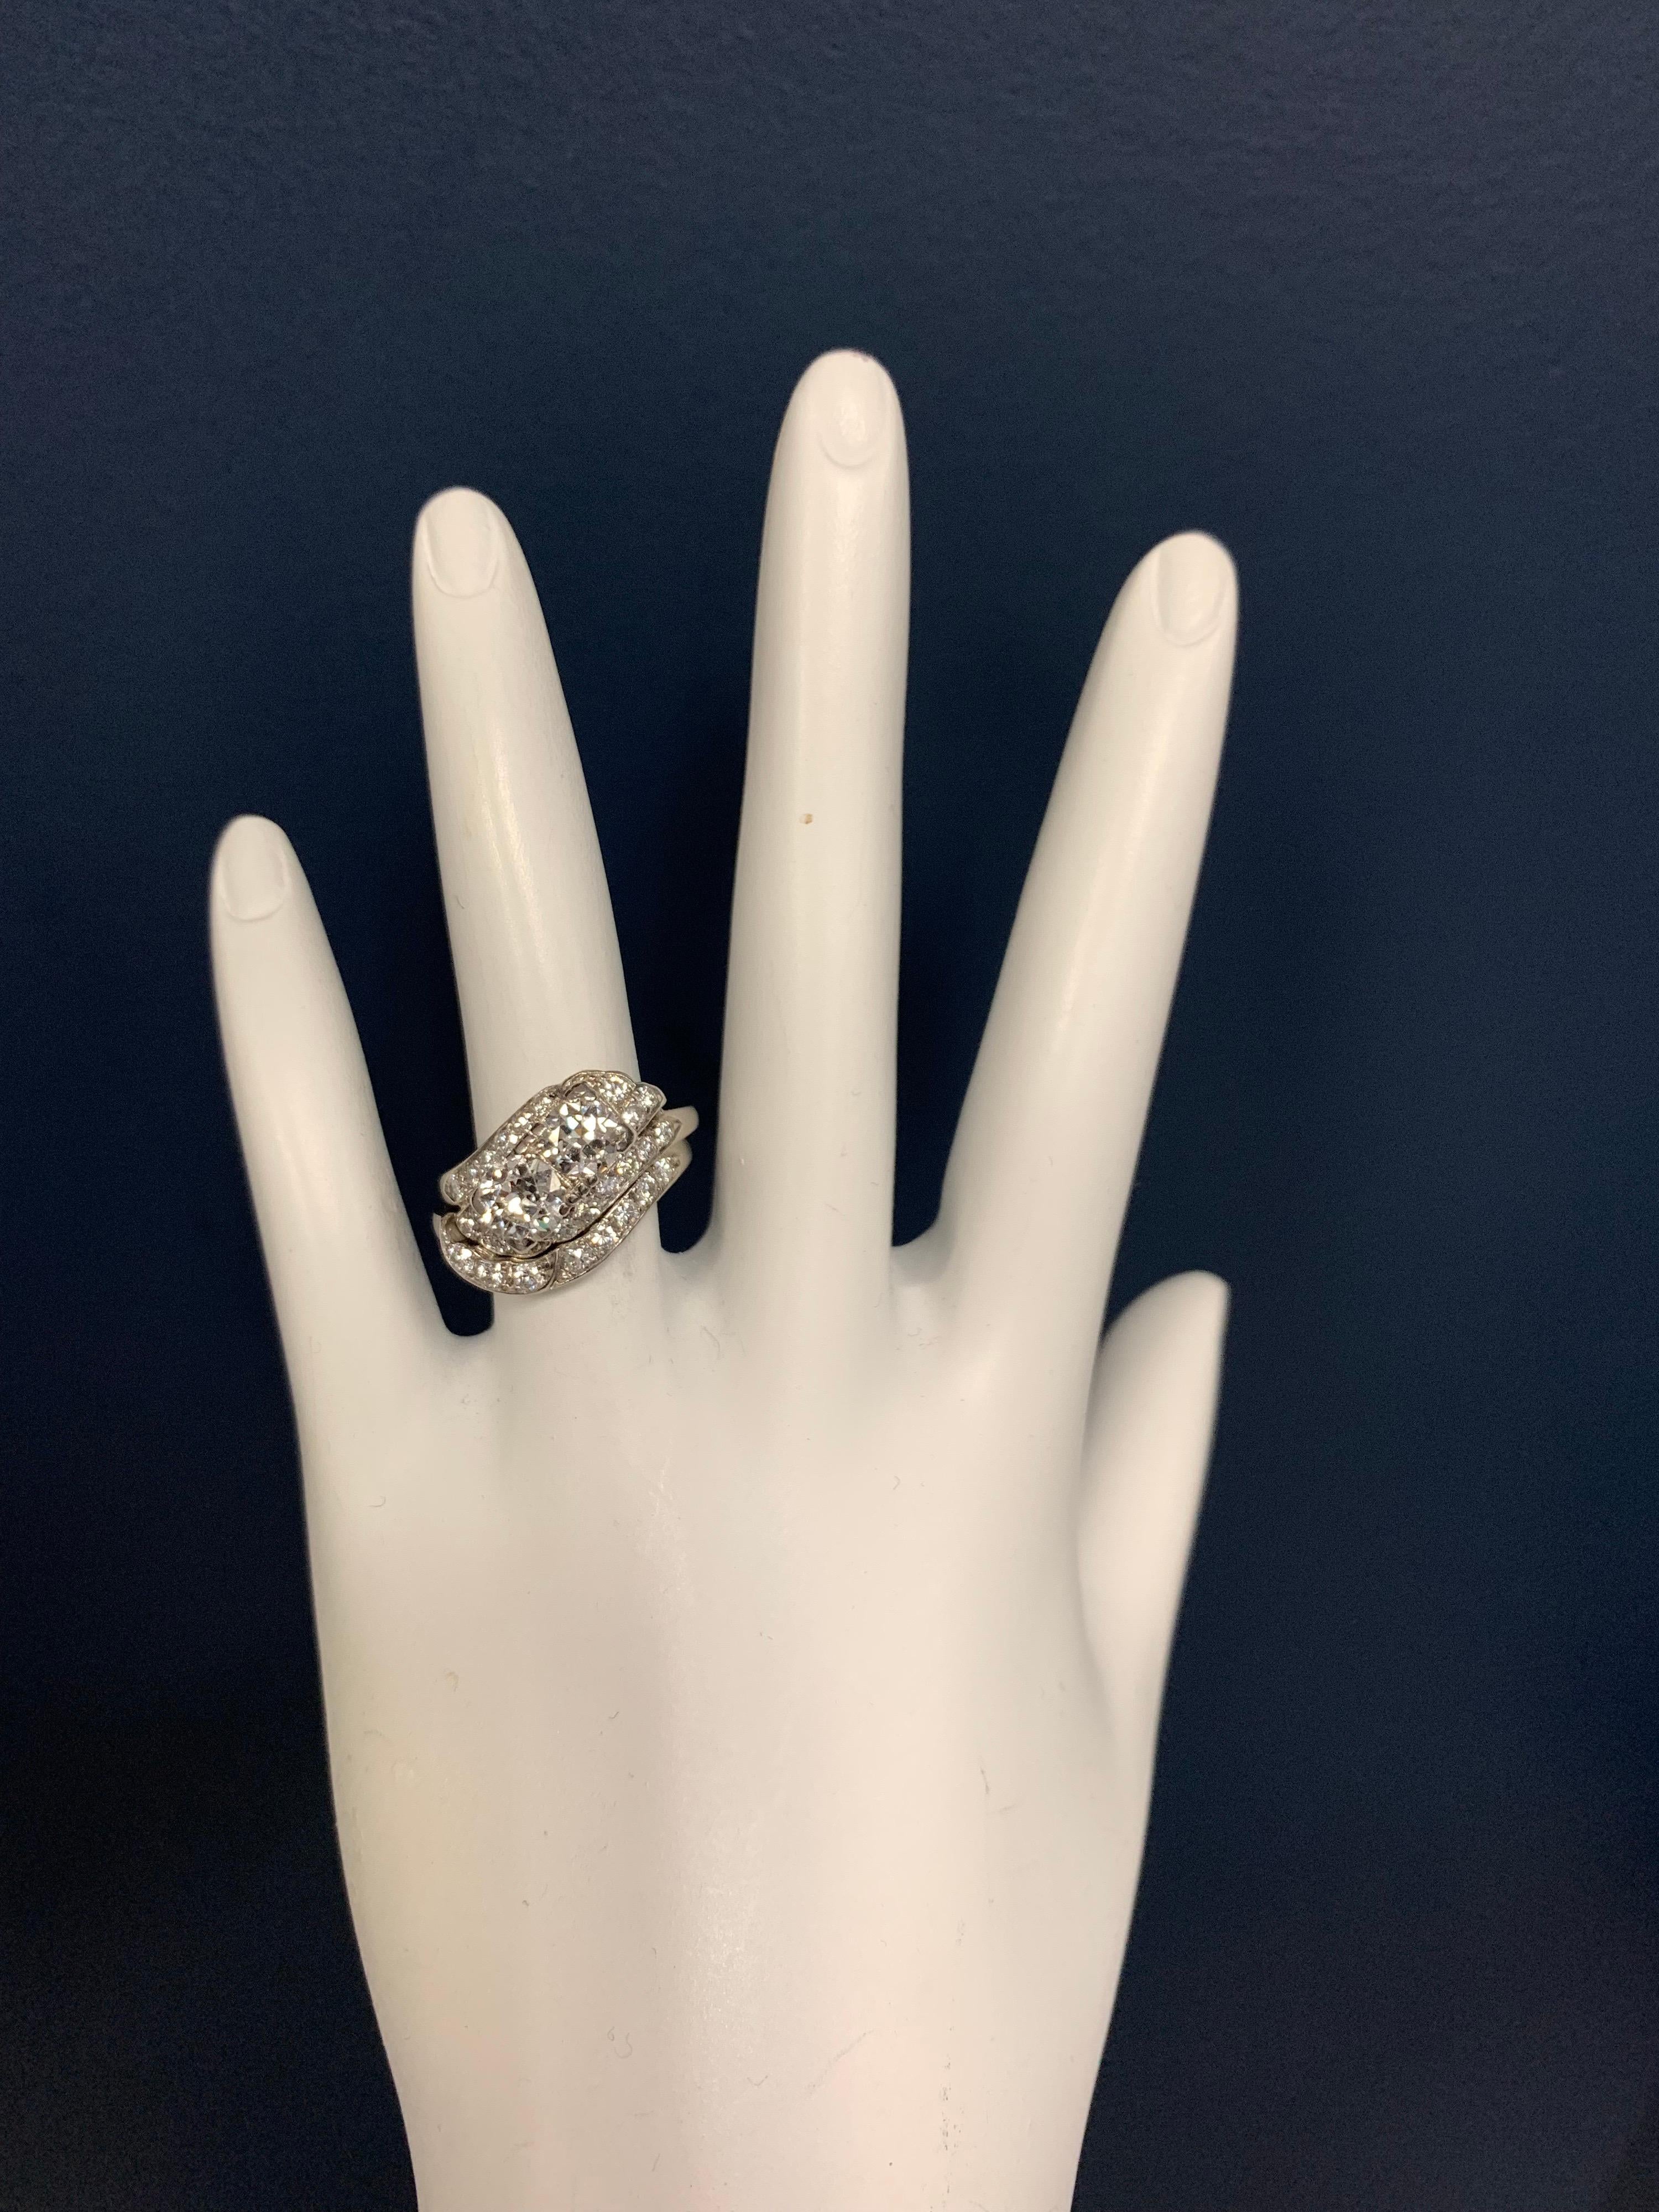 Vintage Platinum RING (size 5) set with two Old Mine Brilliant Natural Diamonds, one measuring approximately 5.5mm, 0.65cts and the second measuring approximately 6.1mm, 0.80cts. The stones are approximately H in color and VS in clarity. In addition